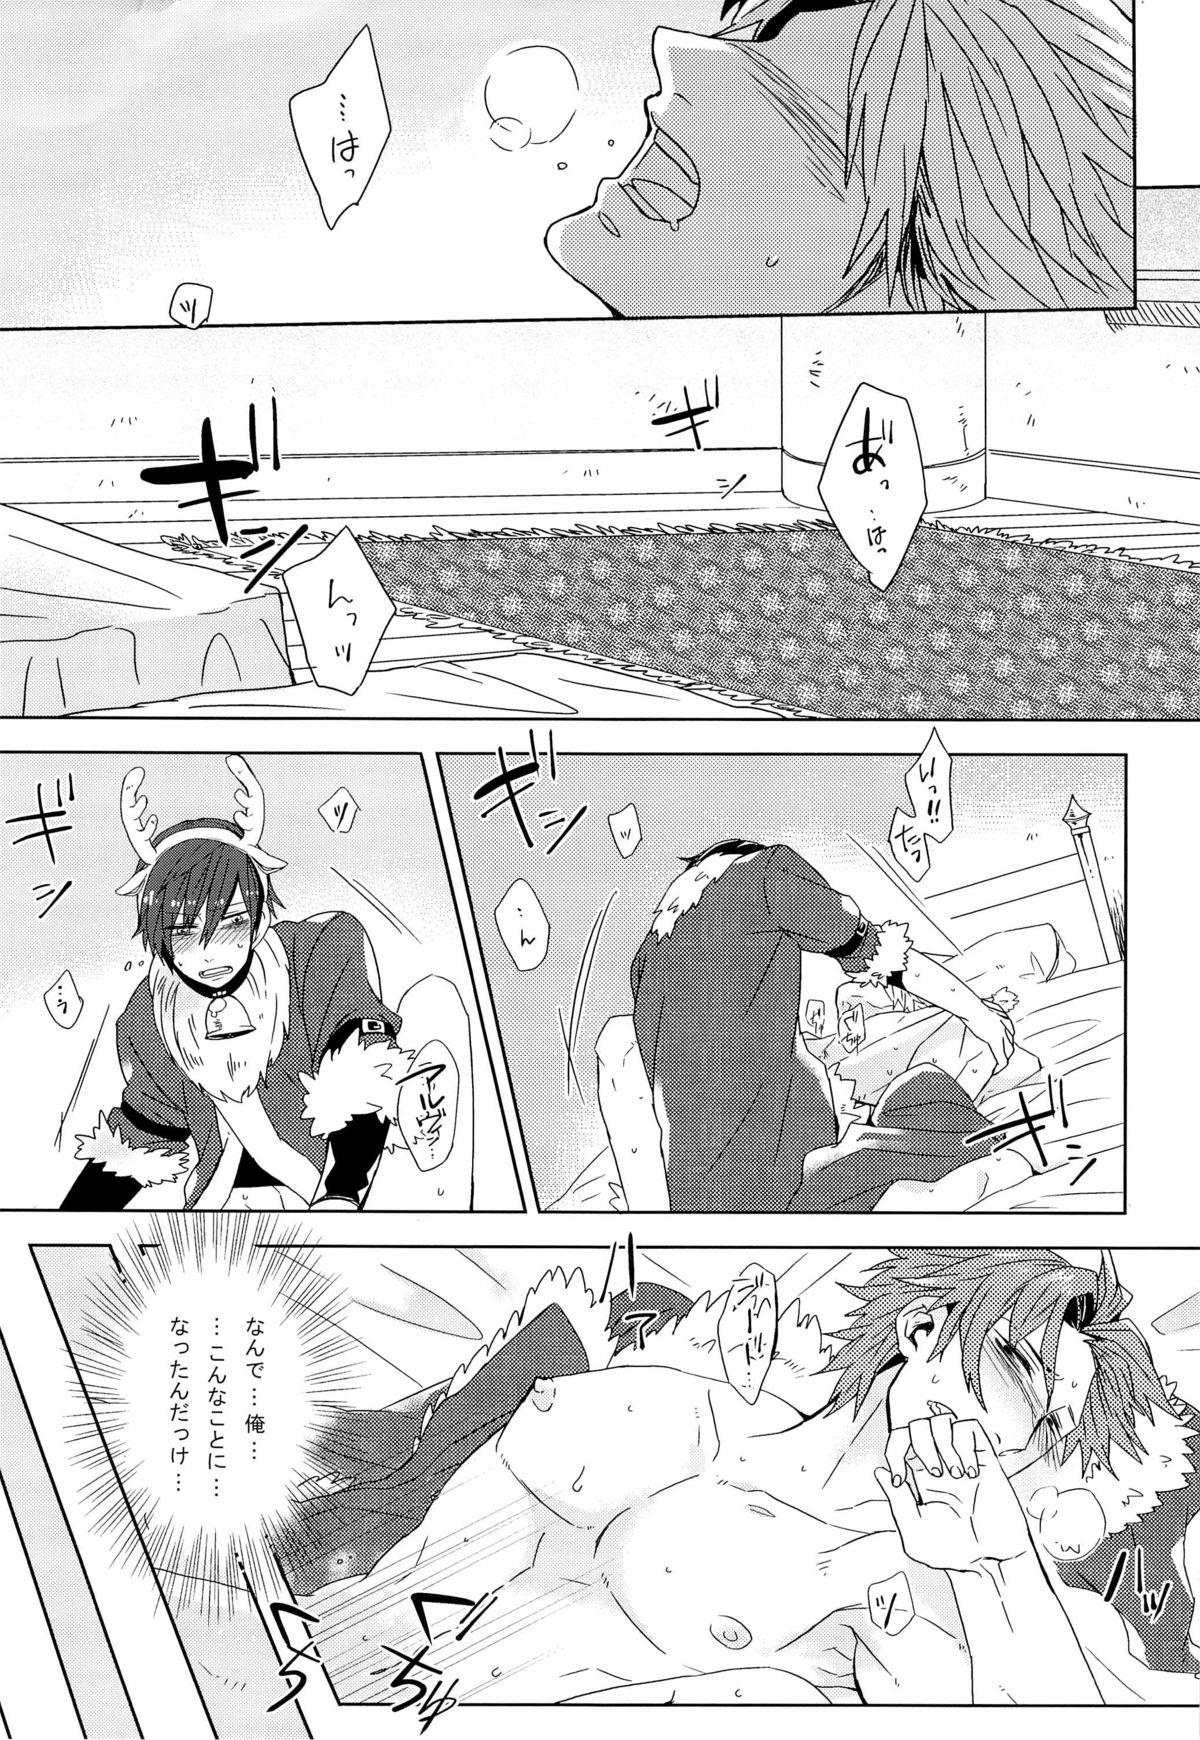 Kitchen Merry Christmas! - Tales of xillia Tales of Erotica - Page 7